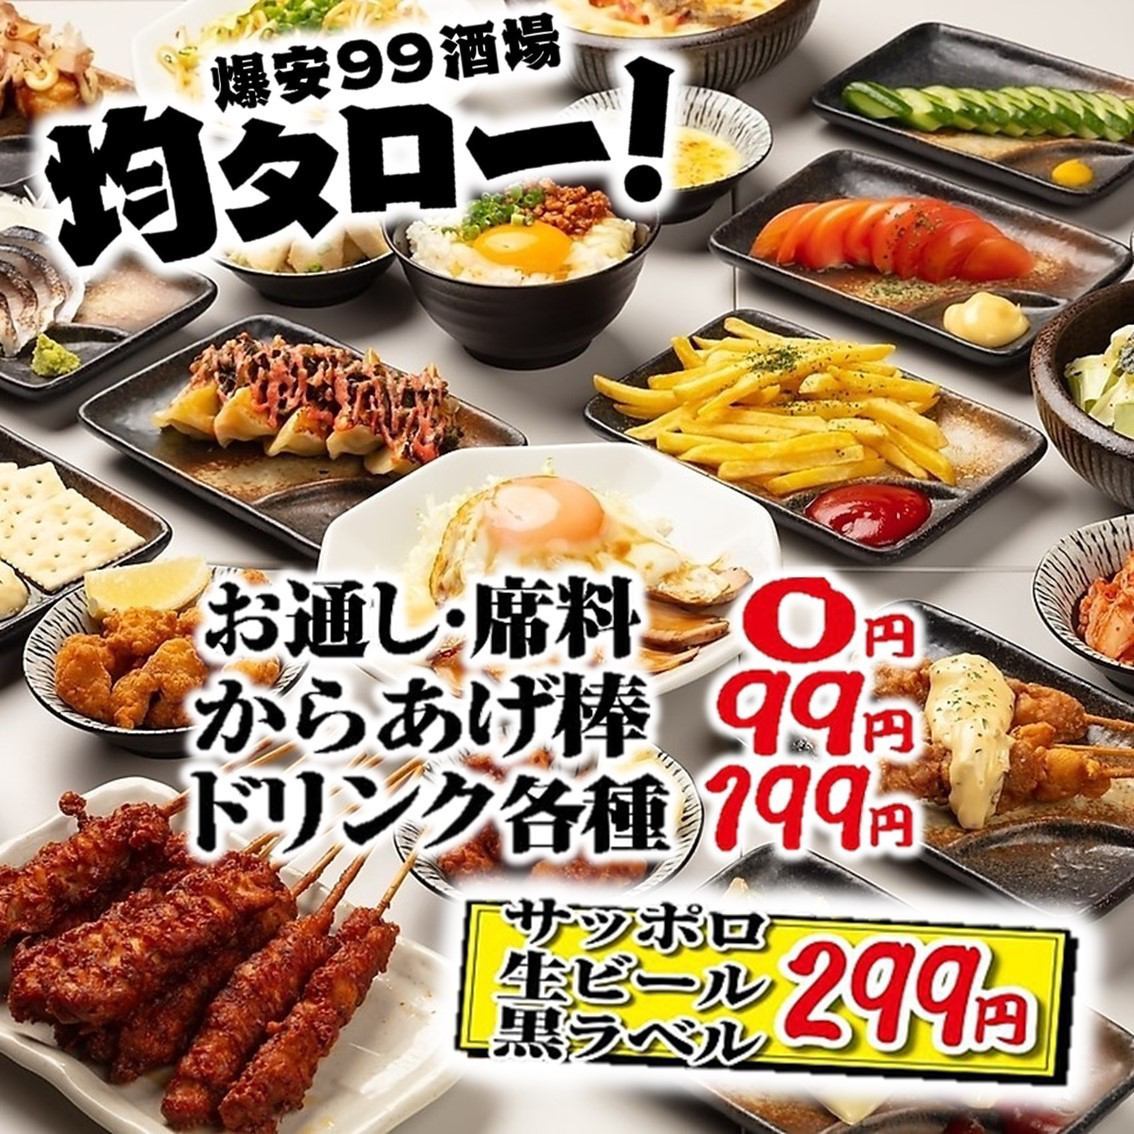 Just 30 seconds walk from Suidobashi Station! The most cost-effective izakaya open until 5am! 0 yen for appetizers and seats